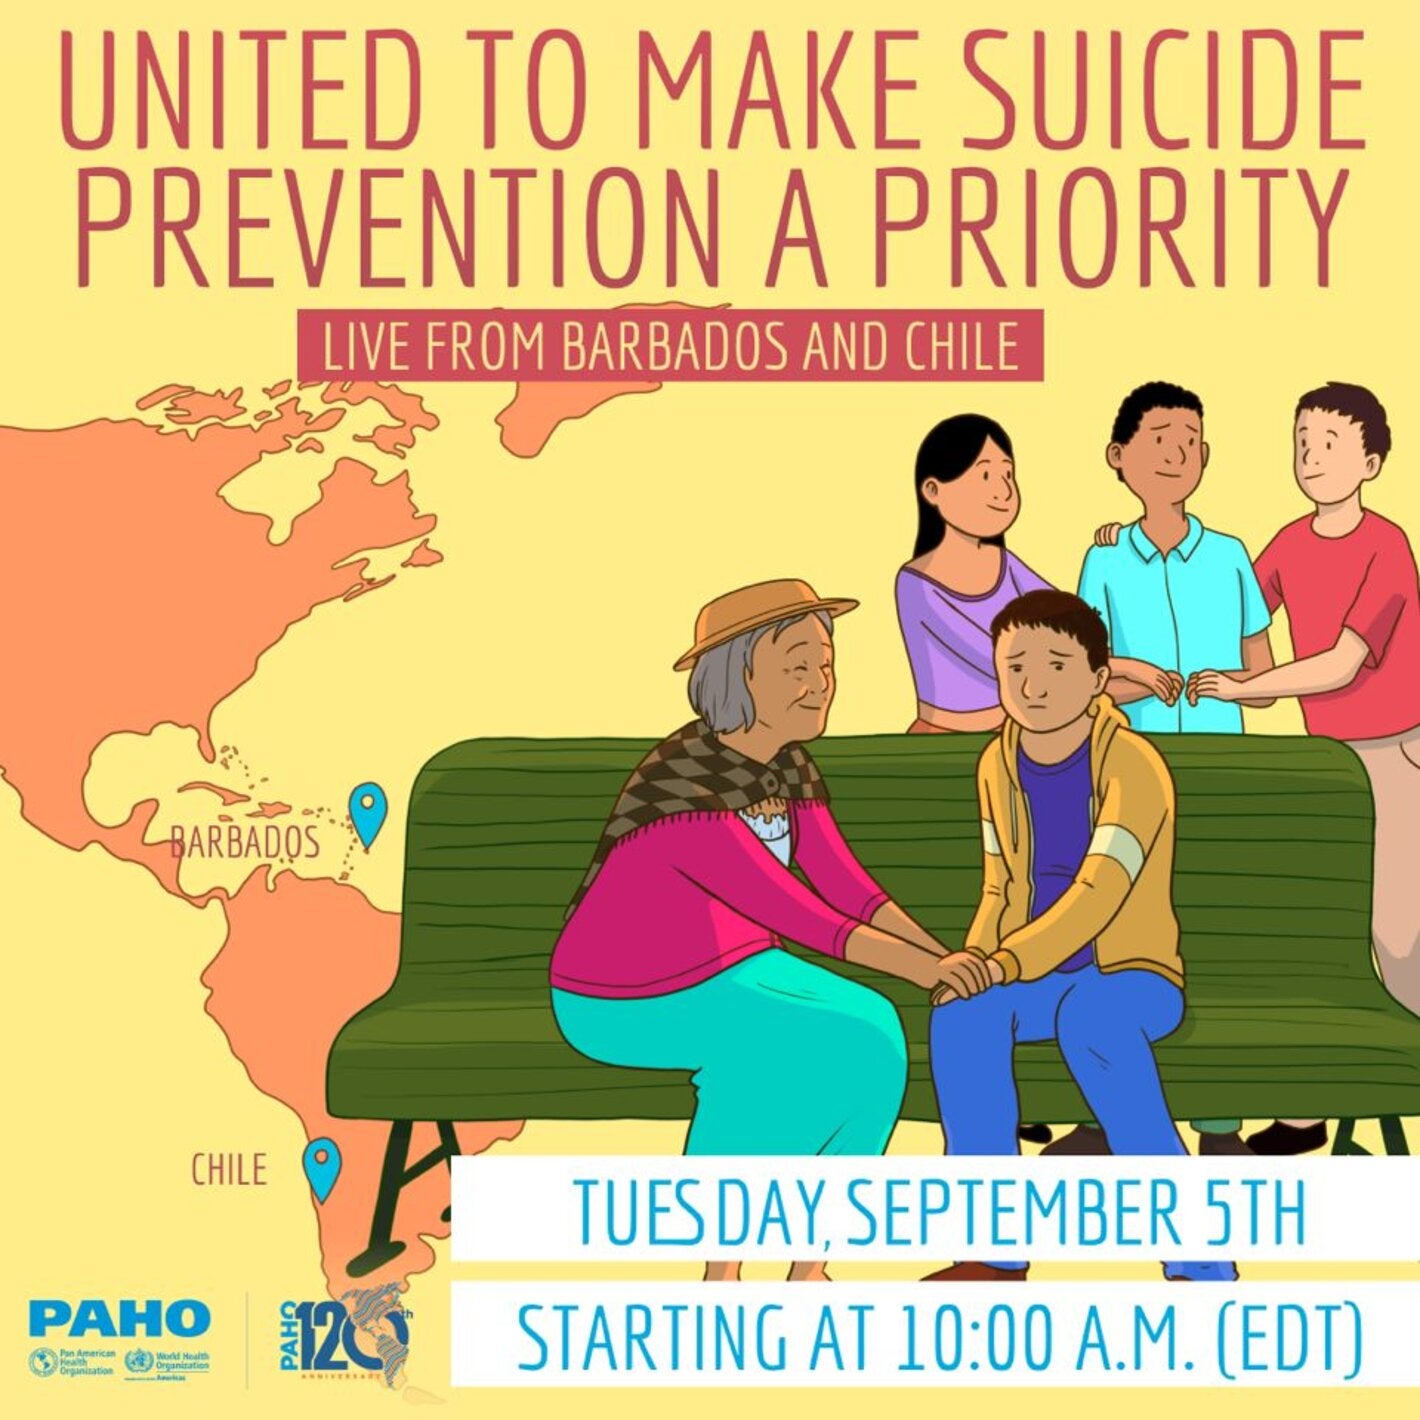 United to make suicide prevention a priority: regional event